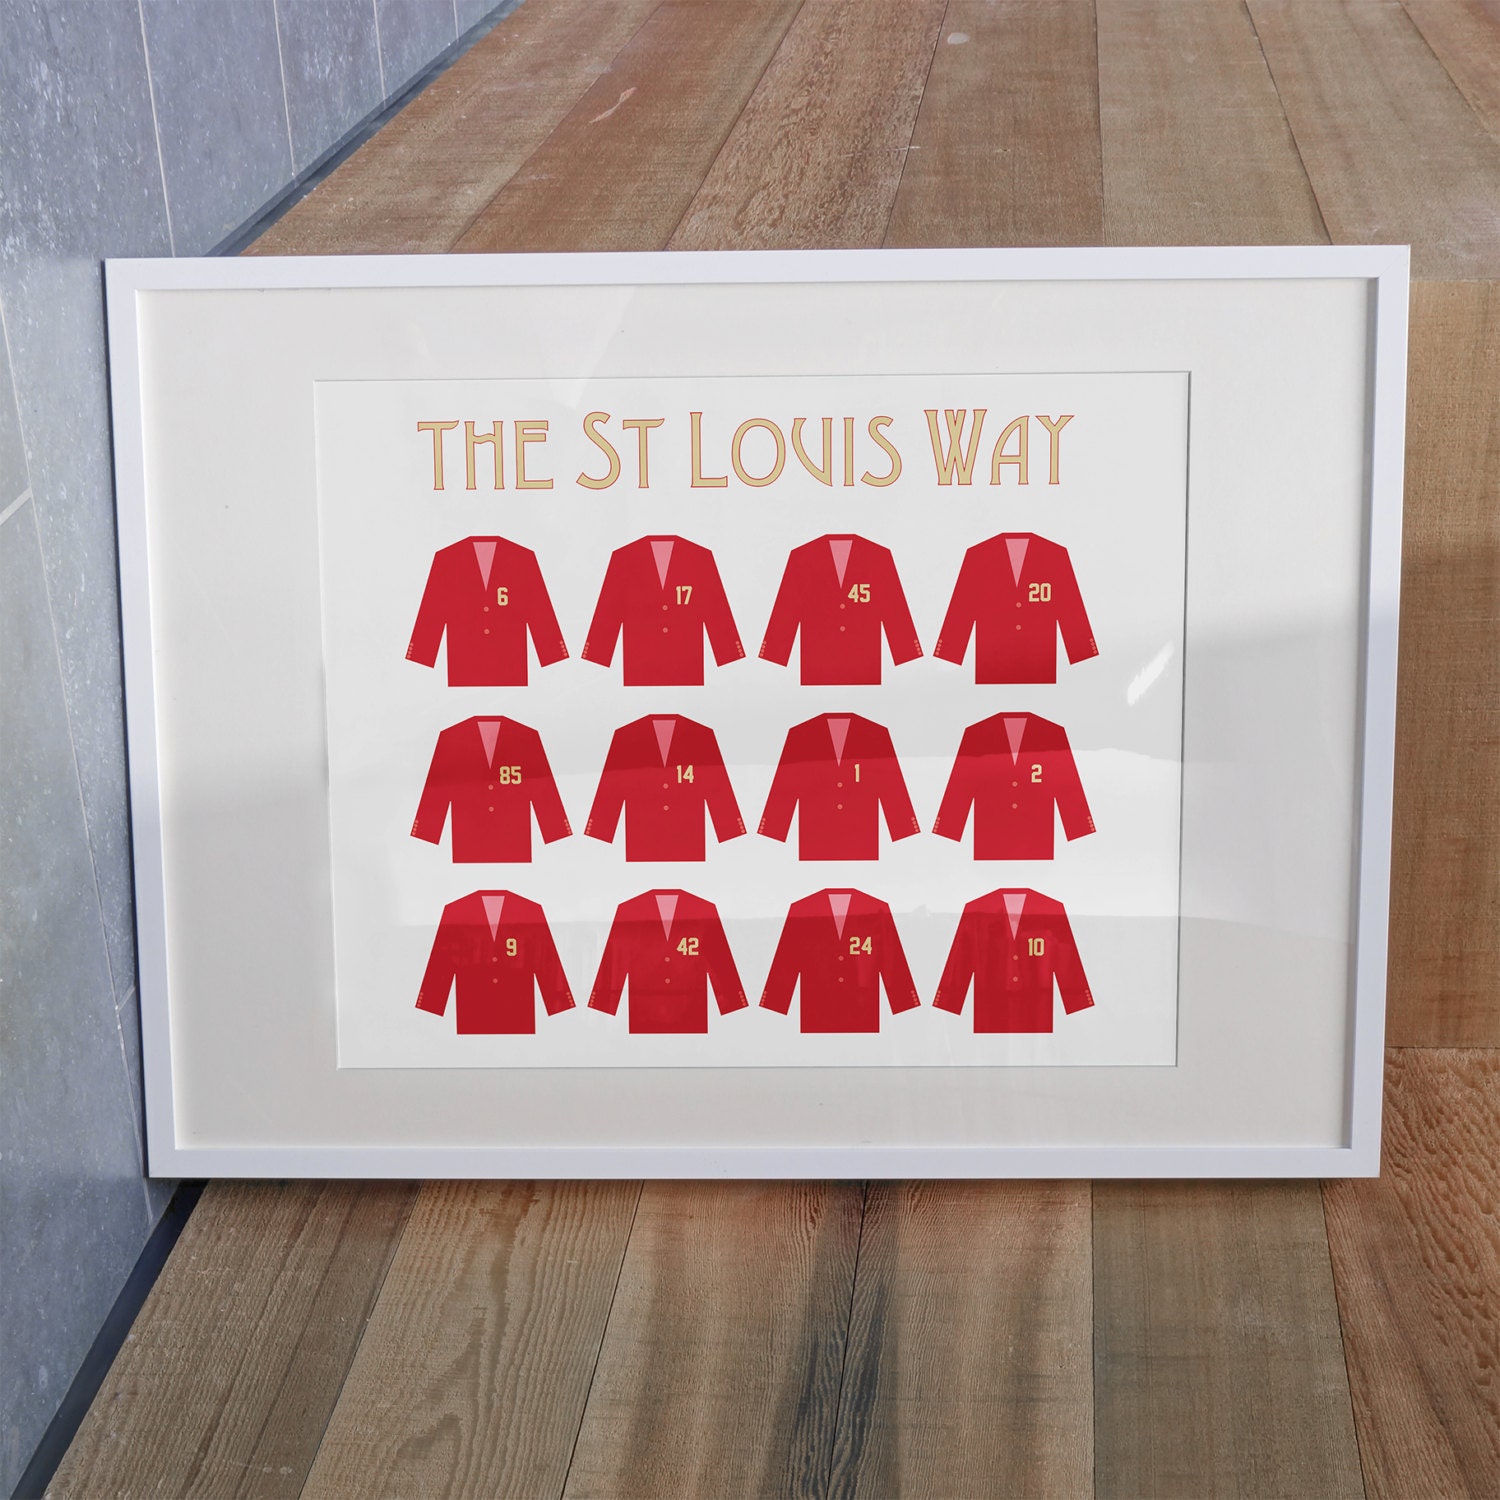 St. Louis Cardinals Retired Numbers Print All 12 players in